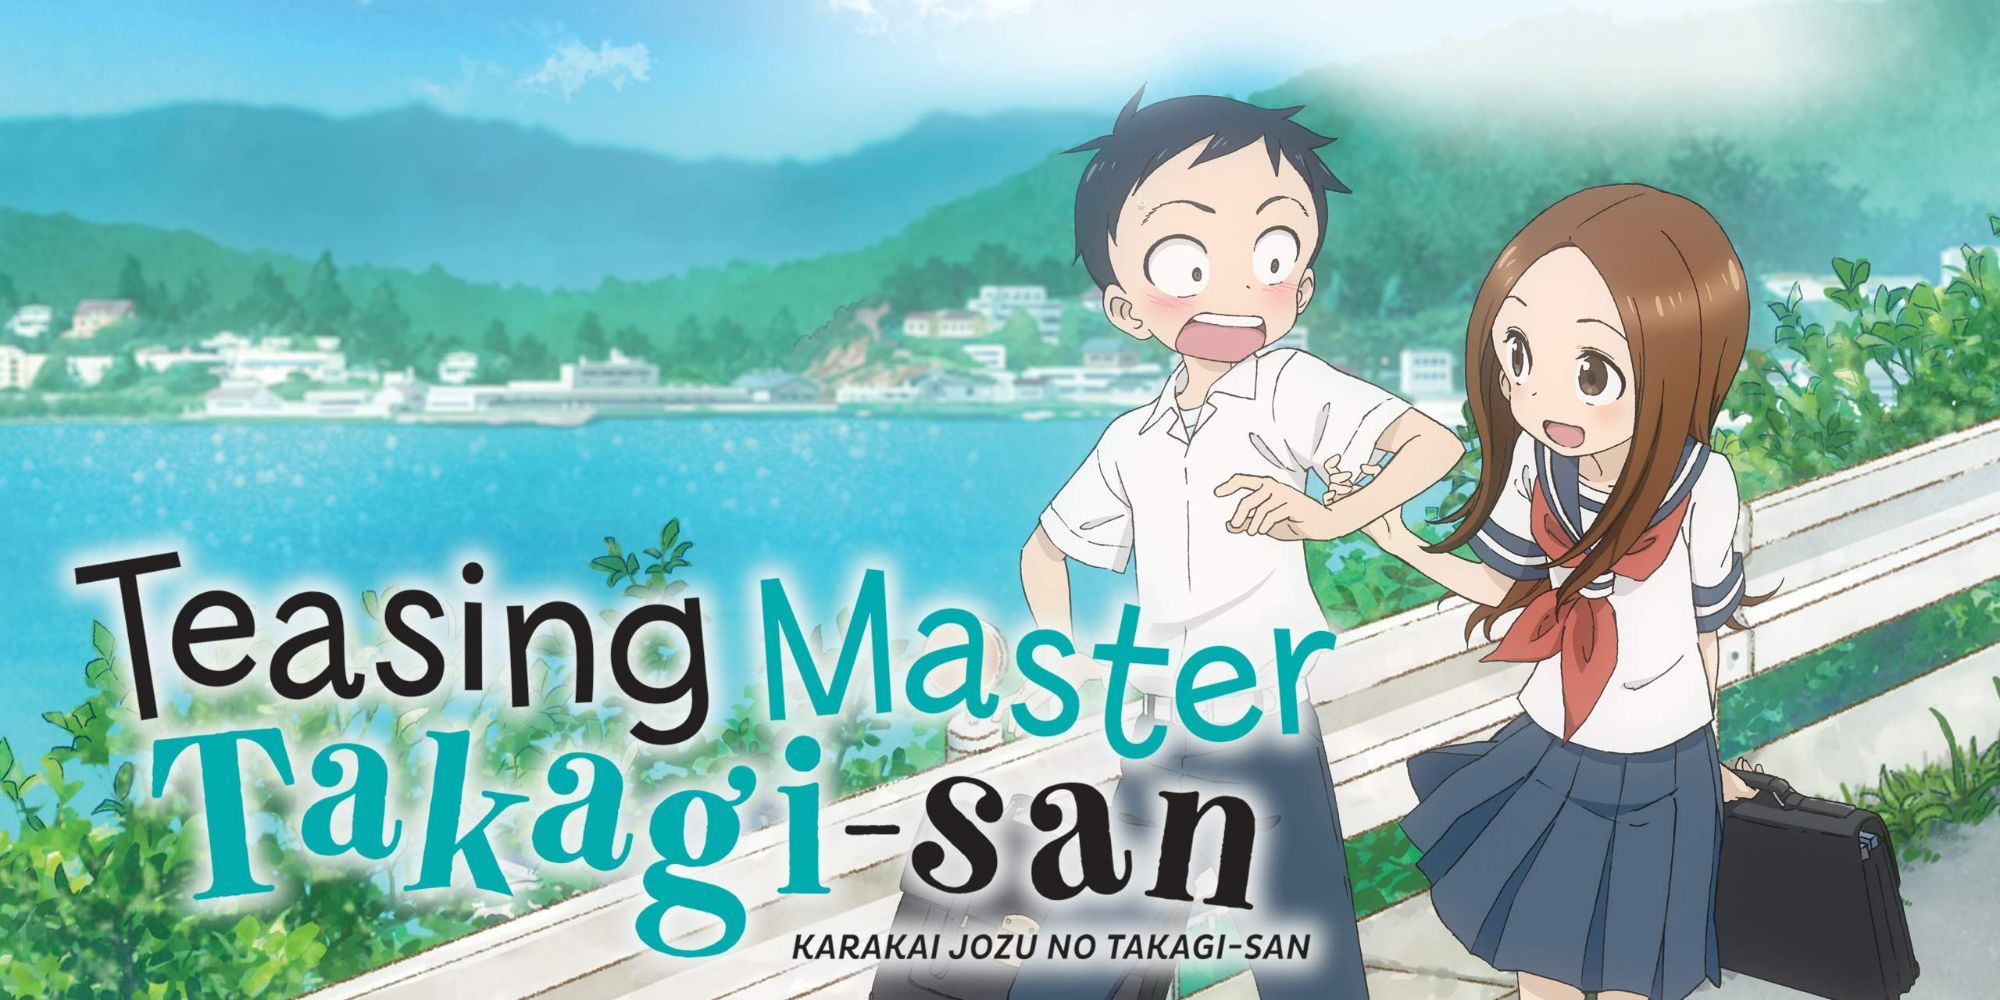 The two main characters from Teasing Master Takagi-san outside